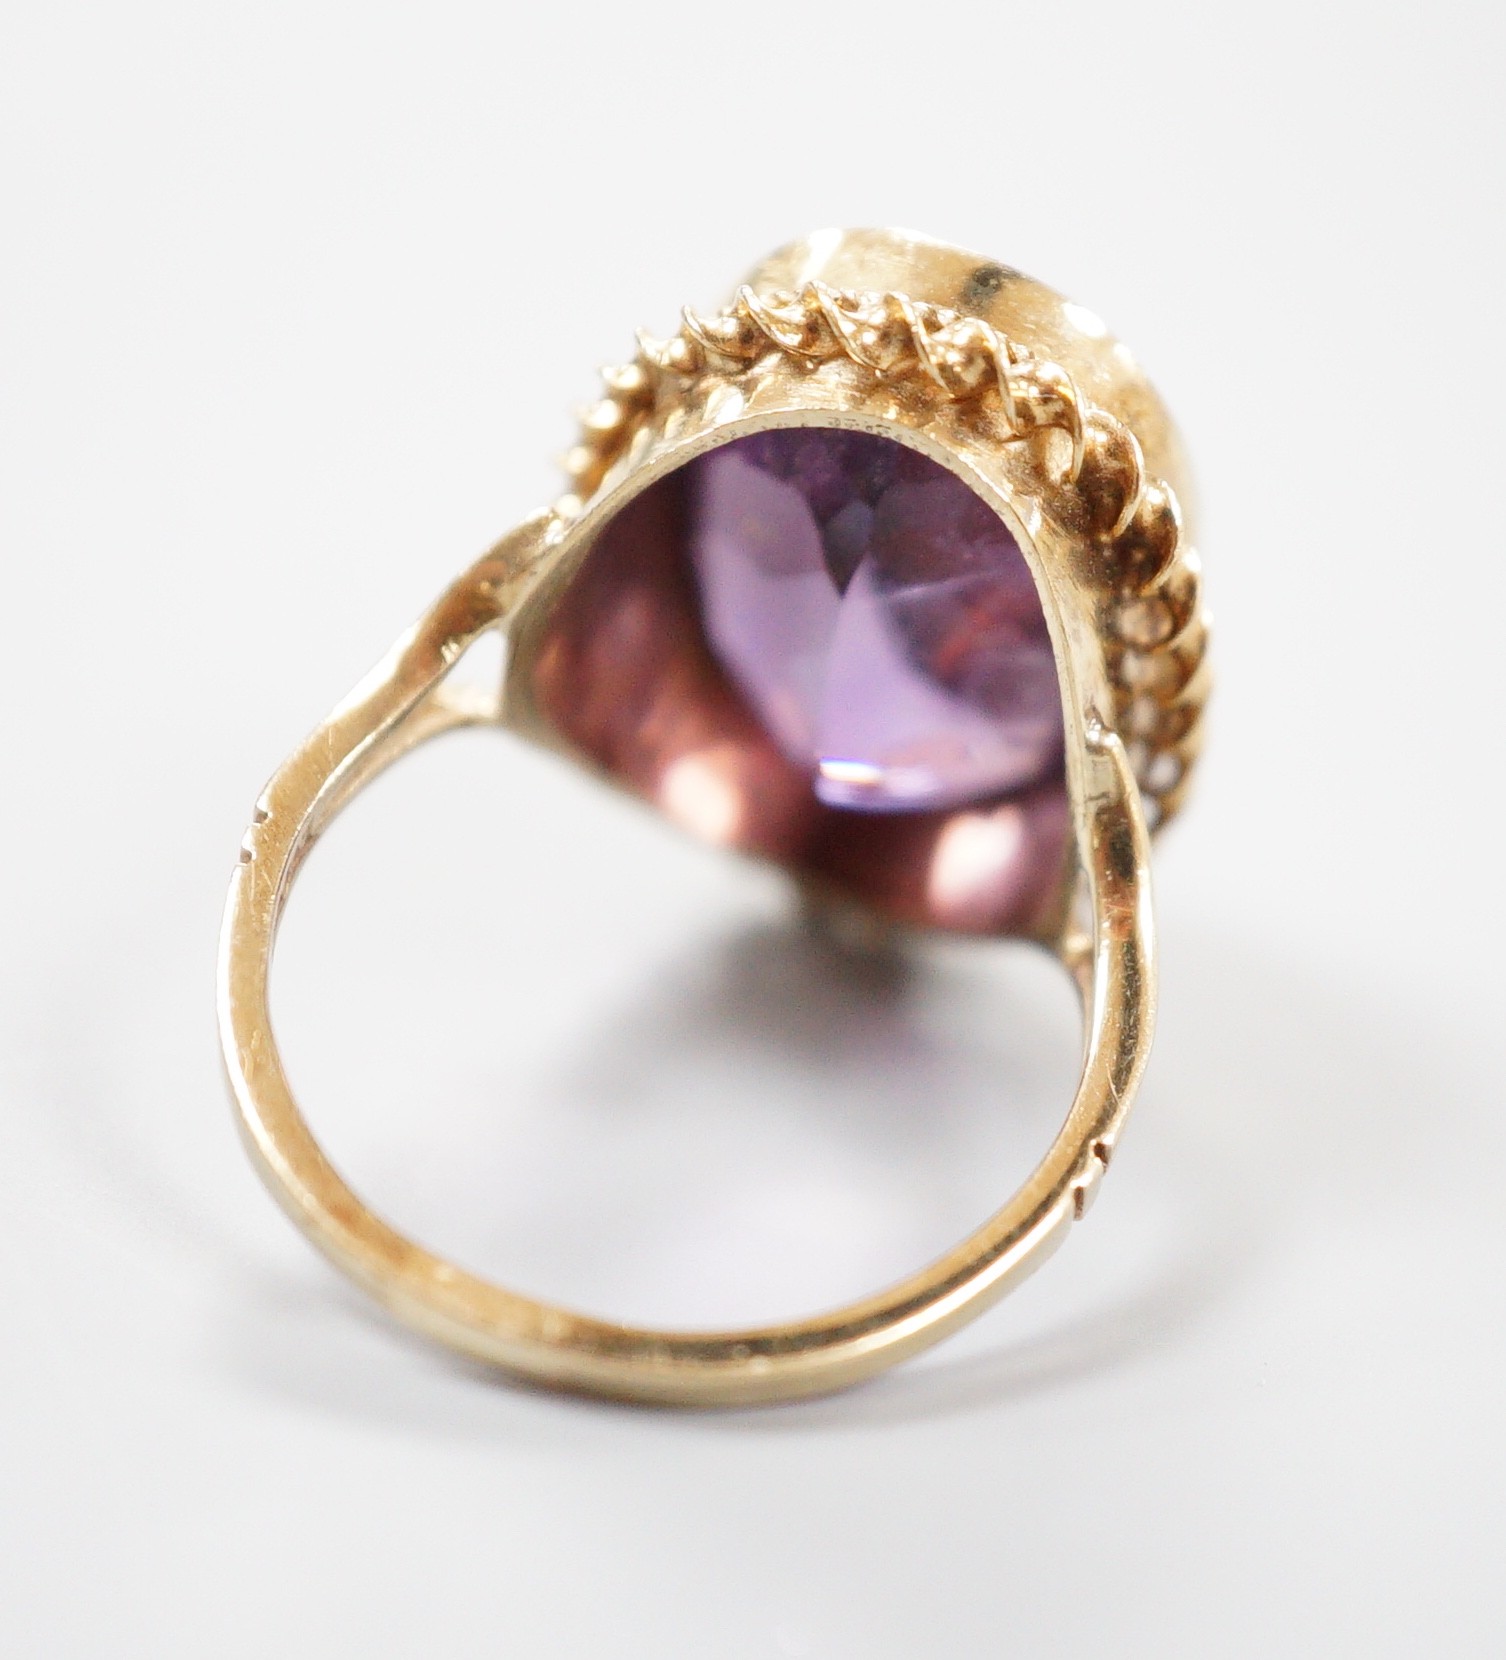 A 1970's 9ct gold and amethyst set dress ring, size O/P gross weight 6.1 grams.